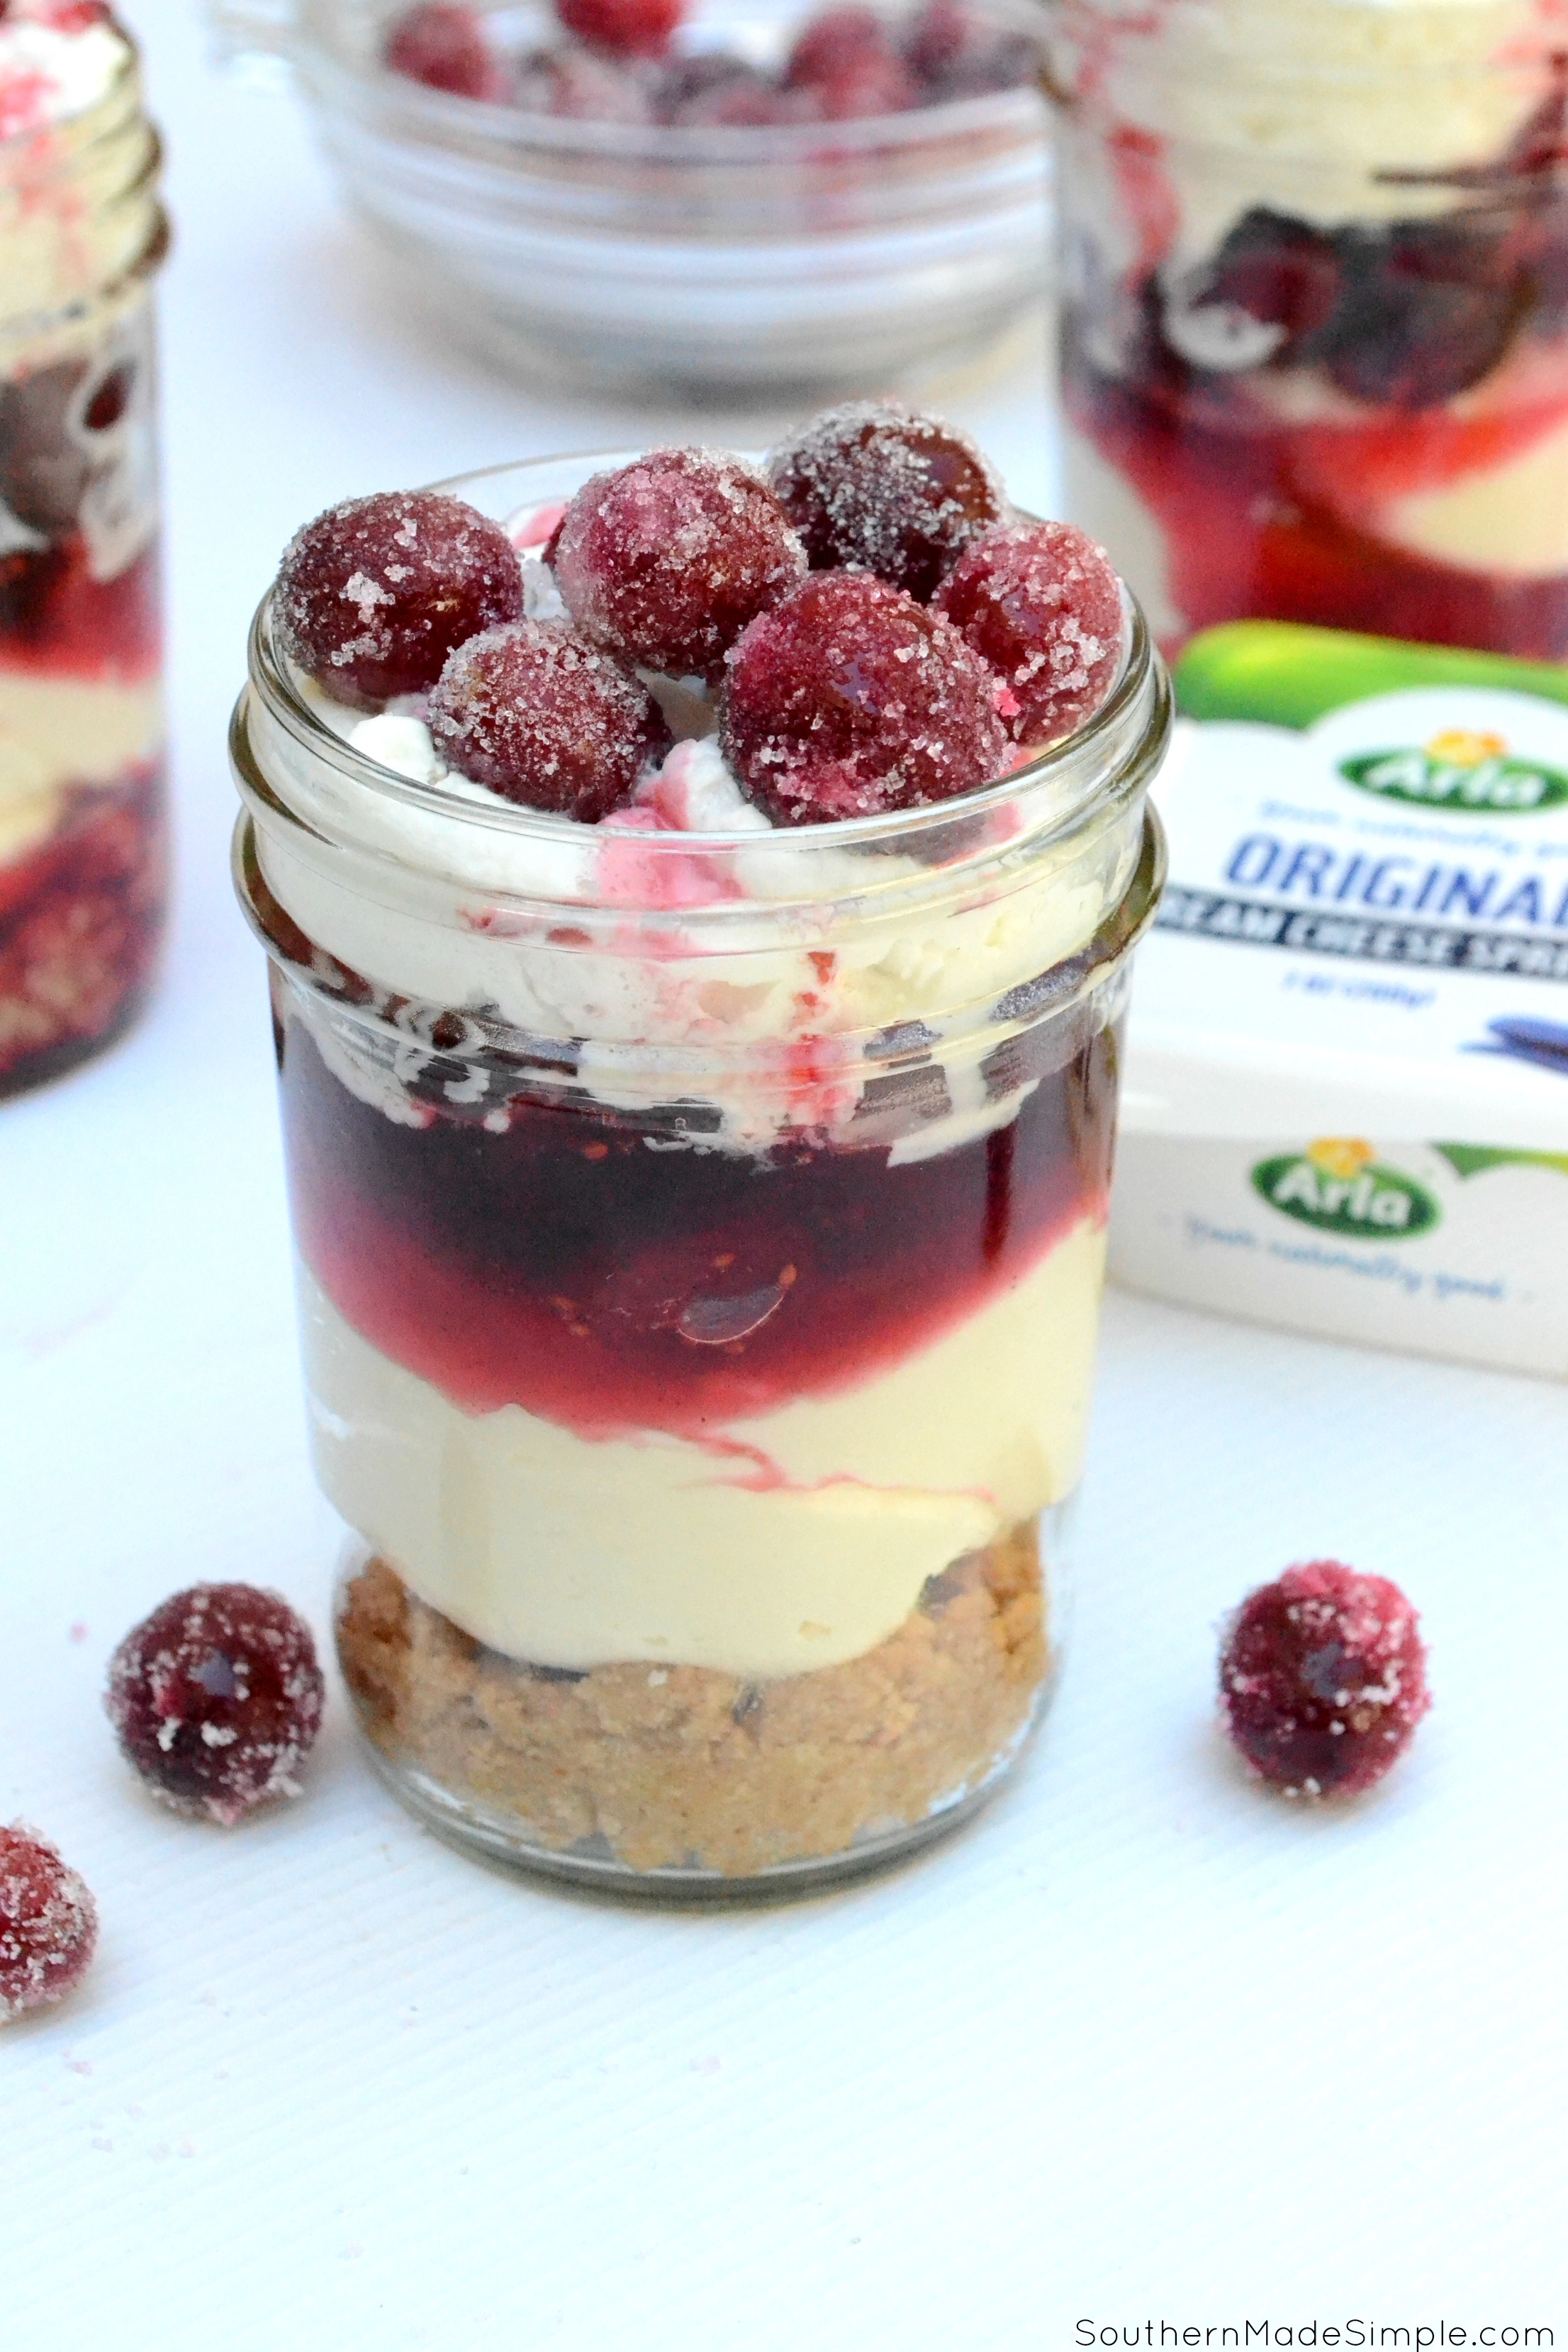 #Ad If you're looking for a sweet treat to whip up for friends and famiy, these No Bake Mini Cranberry Cheesecake Trifles are hard to beat! The sweet and creamy filling paired with the tartness of the cranberries makes for a decadent dessert that'll quickly become a favorite!